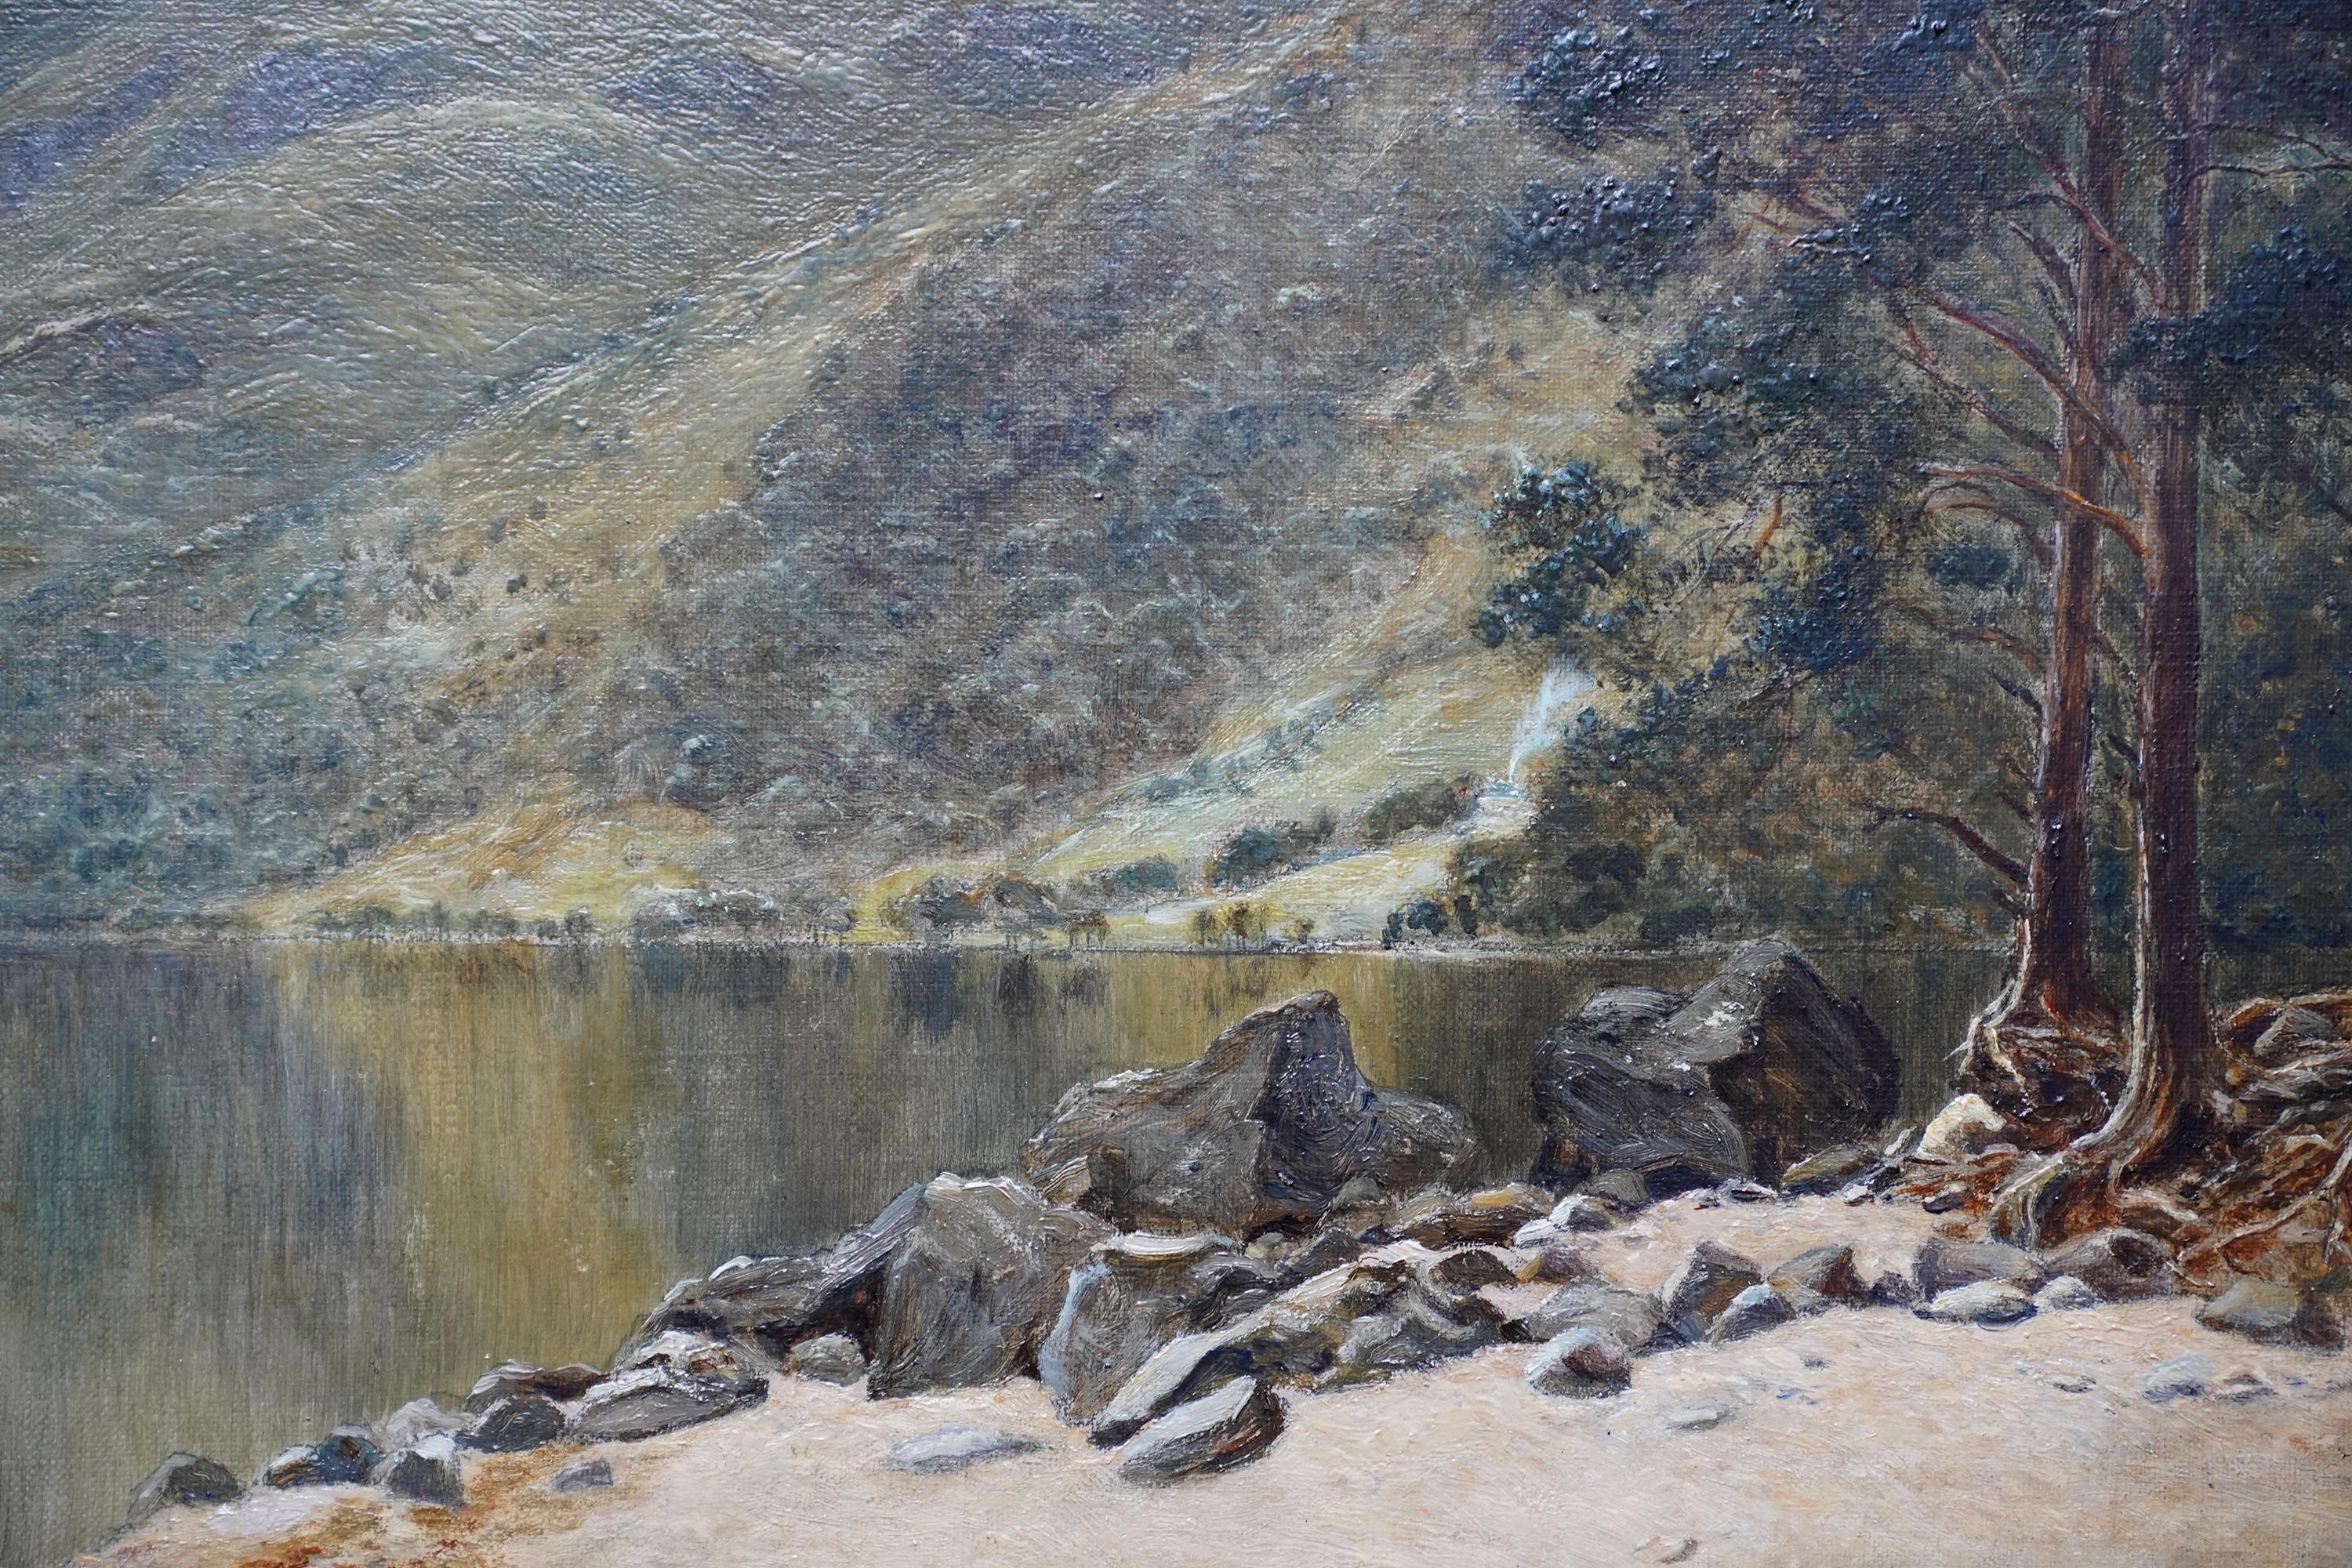 Loch Eck, Scotland - Scottish Edwardian art landscape oil painting  - Realist Painting by William Young